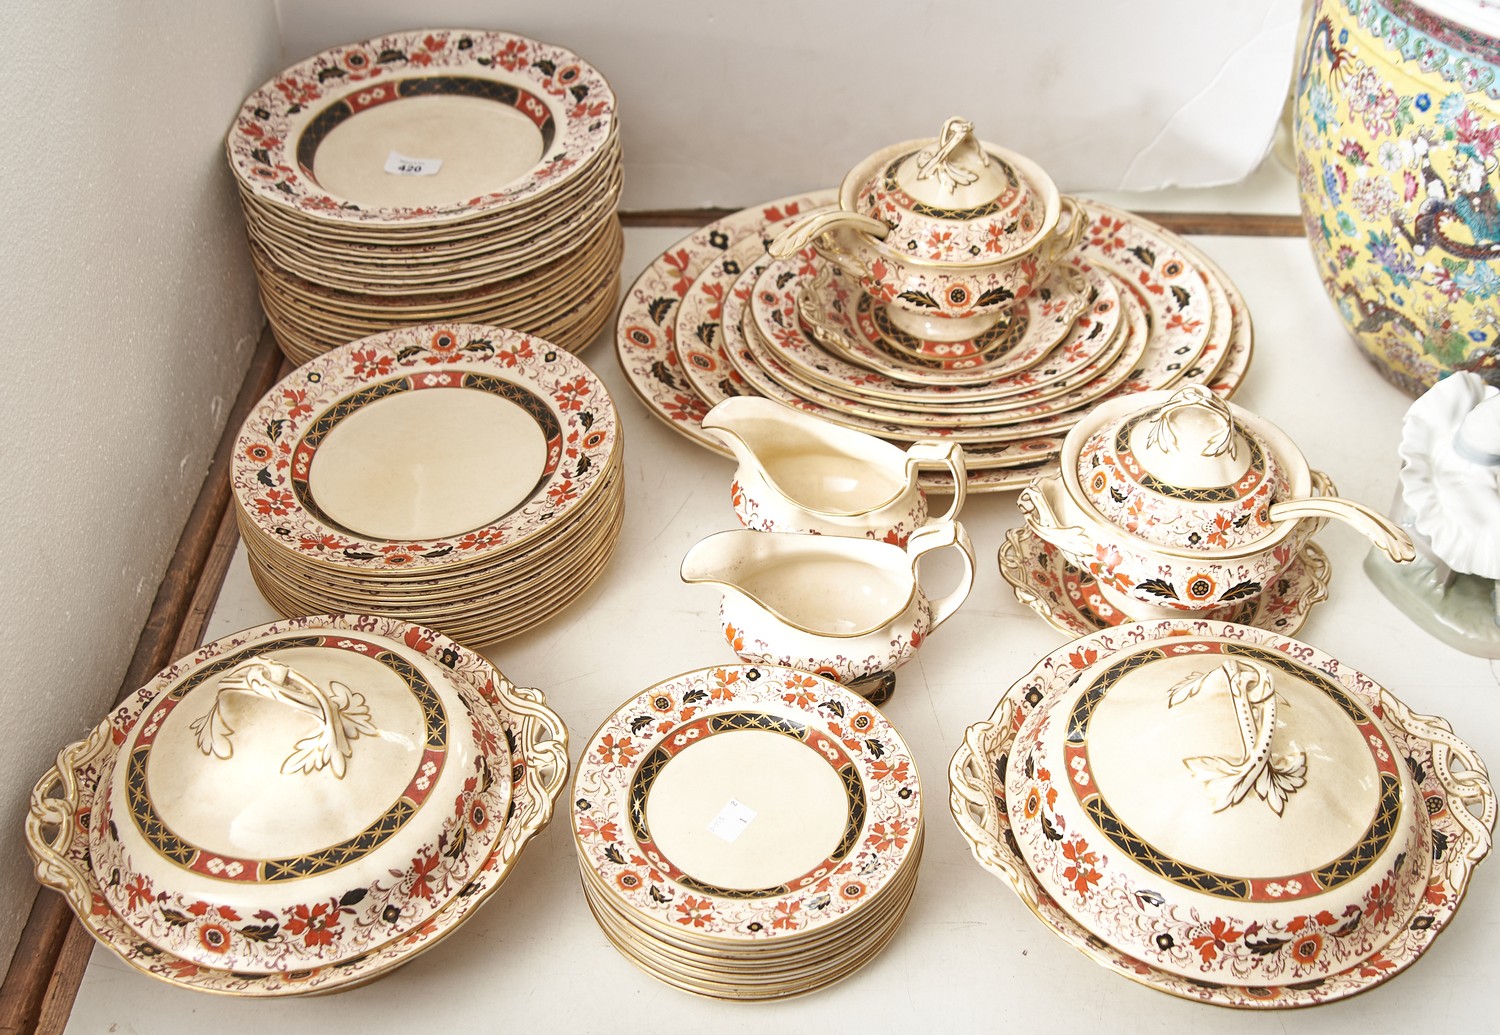 A G L Ashworth & Brothers ironstone dinner service, c1930, printed and enamelled in iron red,